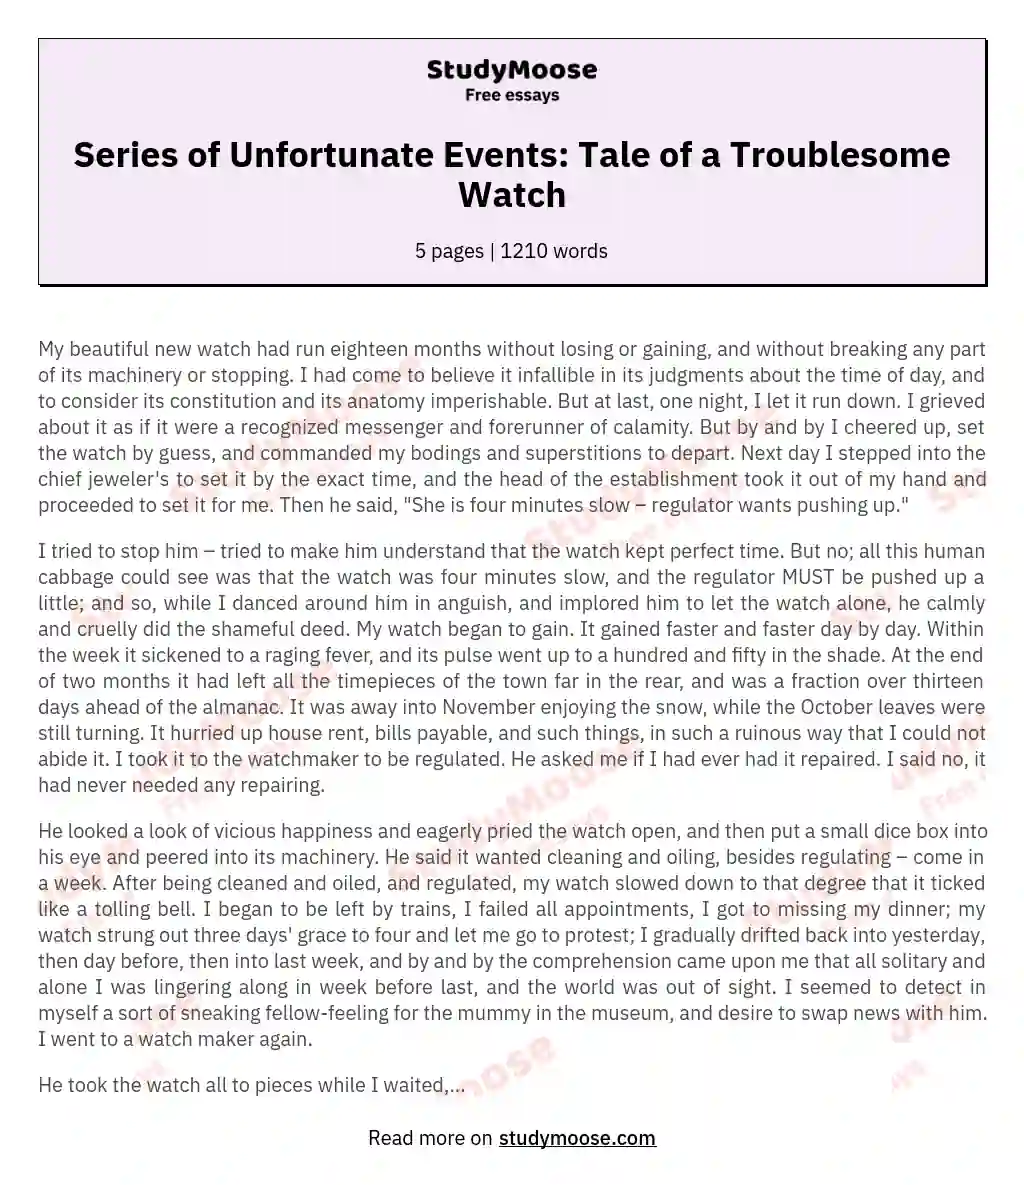 Series of Unfortunate Events: Tale of a Troublesome Watch essay